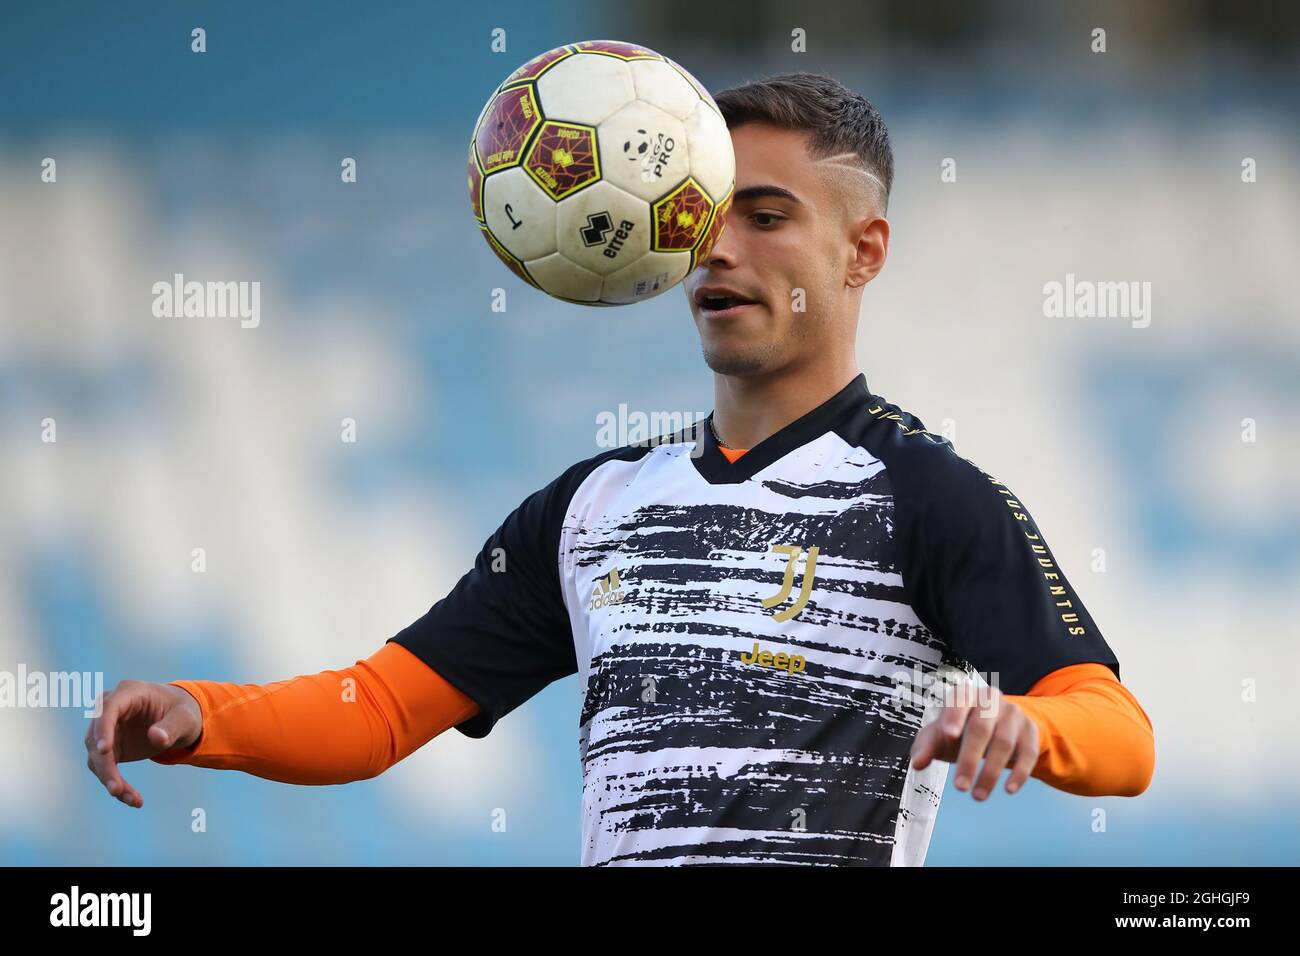 Lucas Oliveira Rosa of Juventus during the warm up prior to the Lega Pro  Serie C match at Stadio Citta di Gorgonzola, Gorgonzola. Picture date: 3rd  October 2020. Picture credit should read: